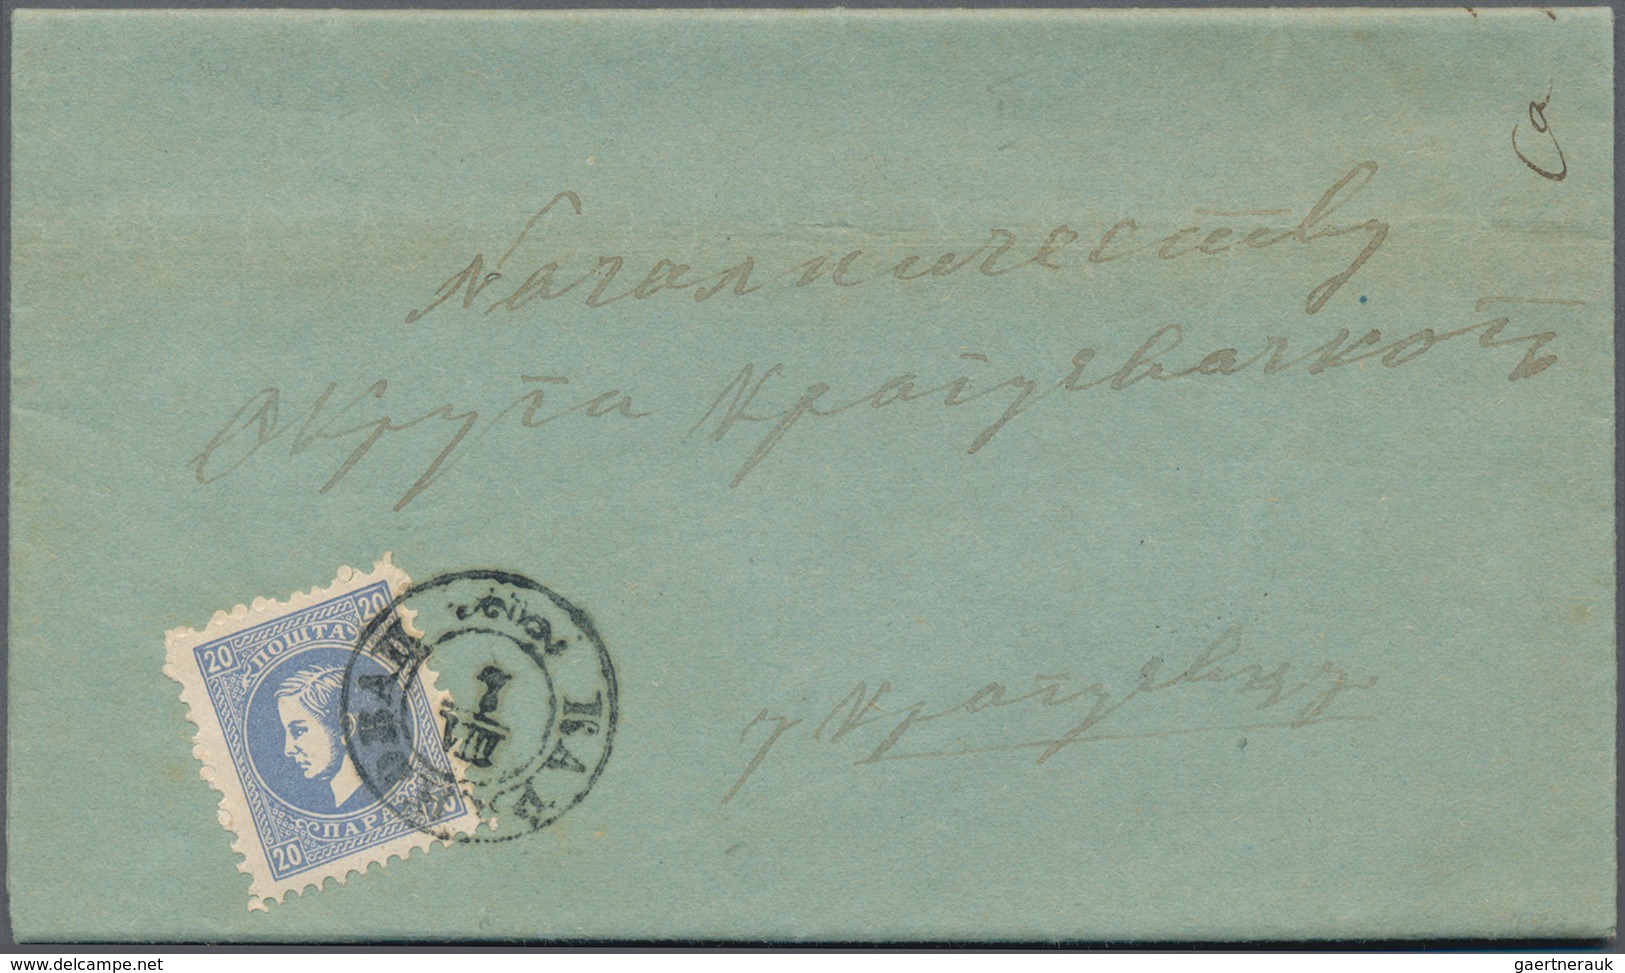 Serbien: 1870/1873, Group Of 4 Domestic Entires / Letter-sheets, Each With Single Franking 20 Pa Blu - Serbia